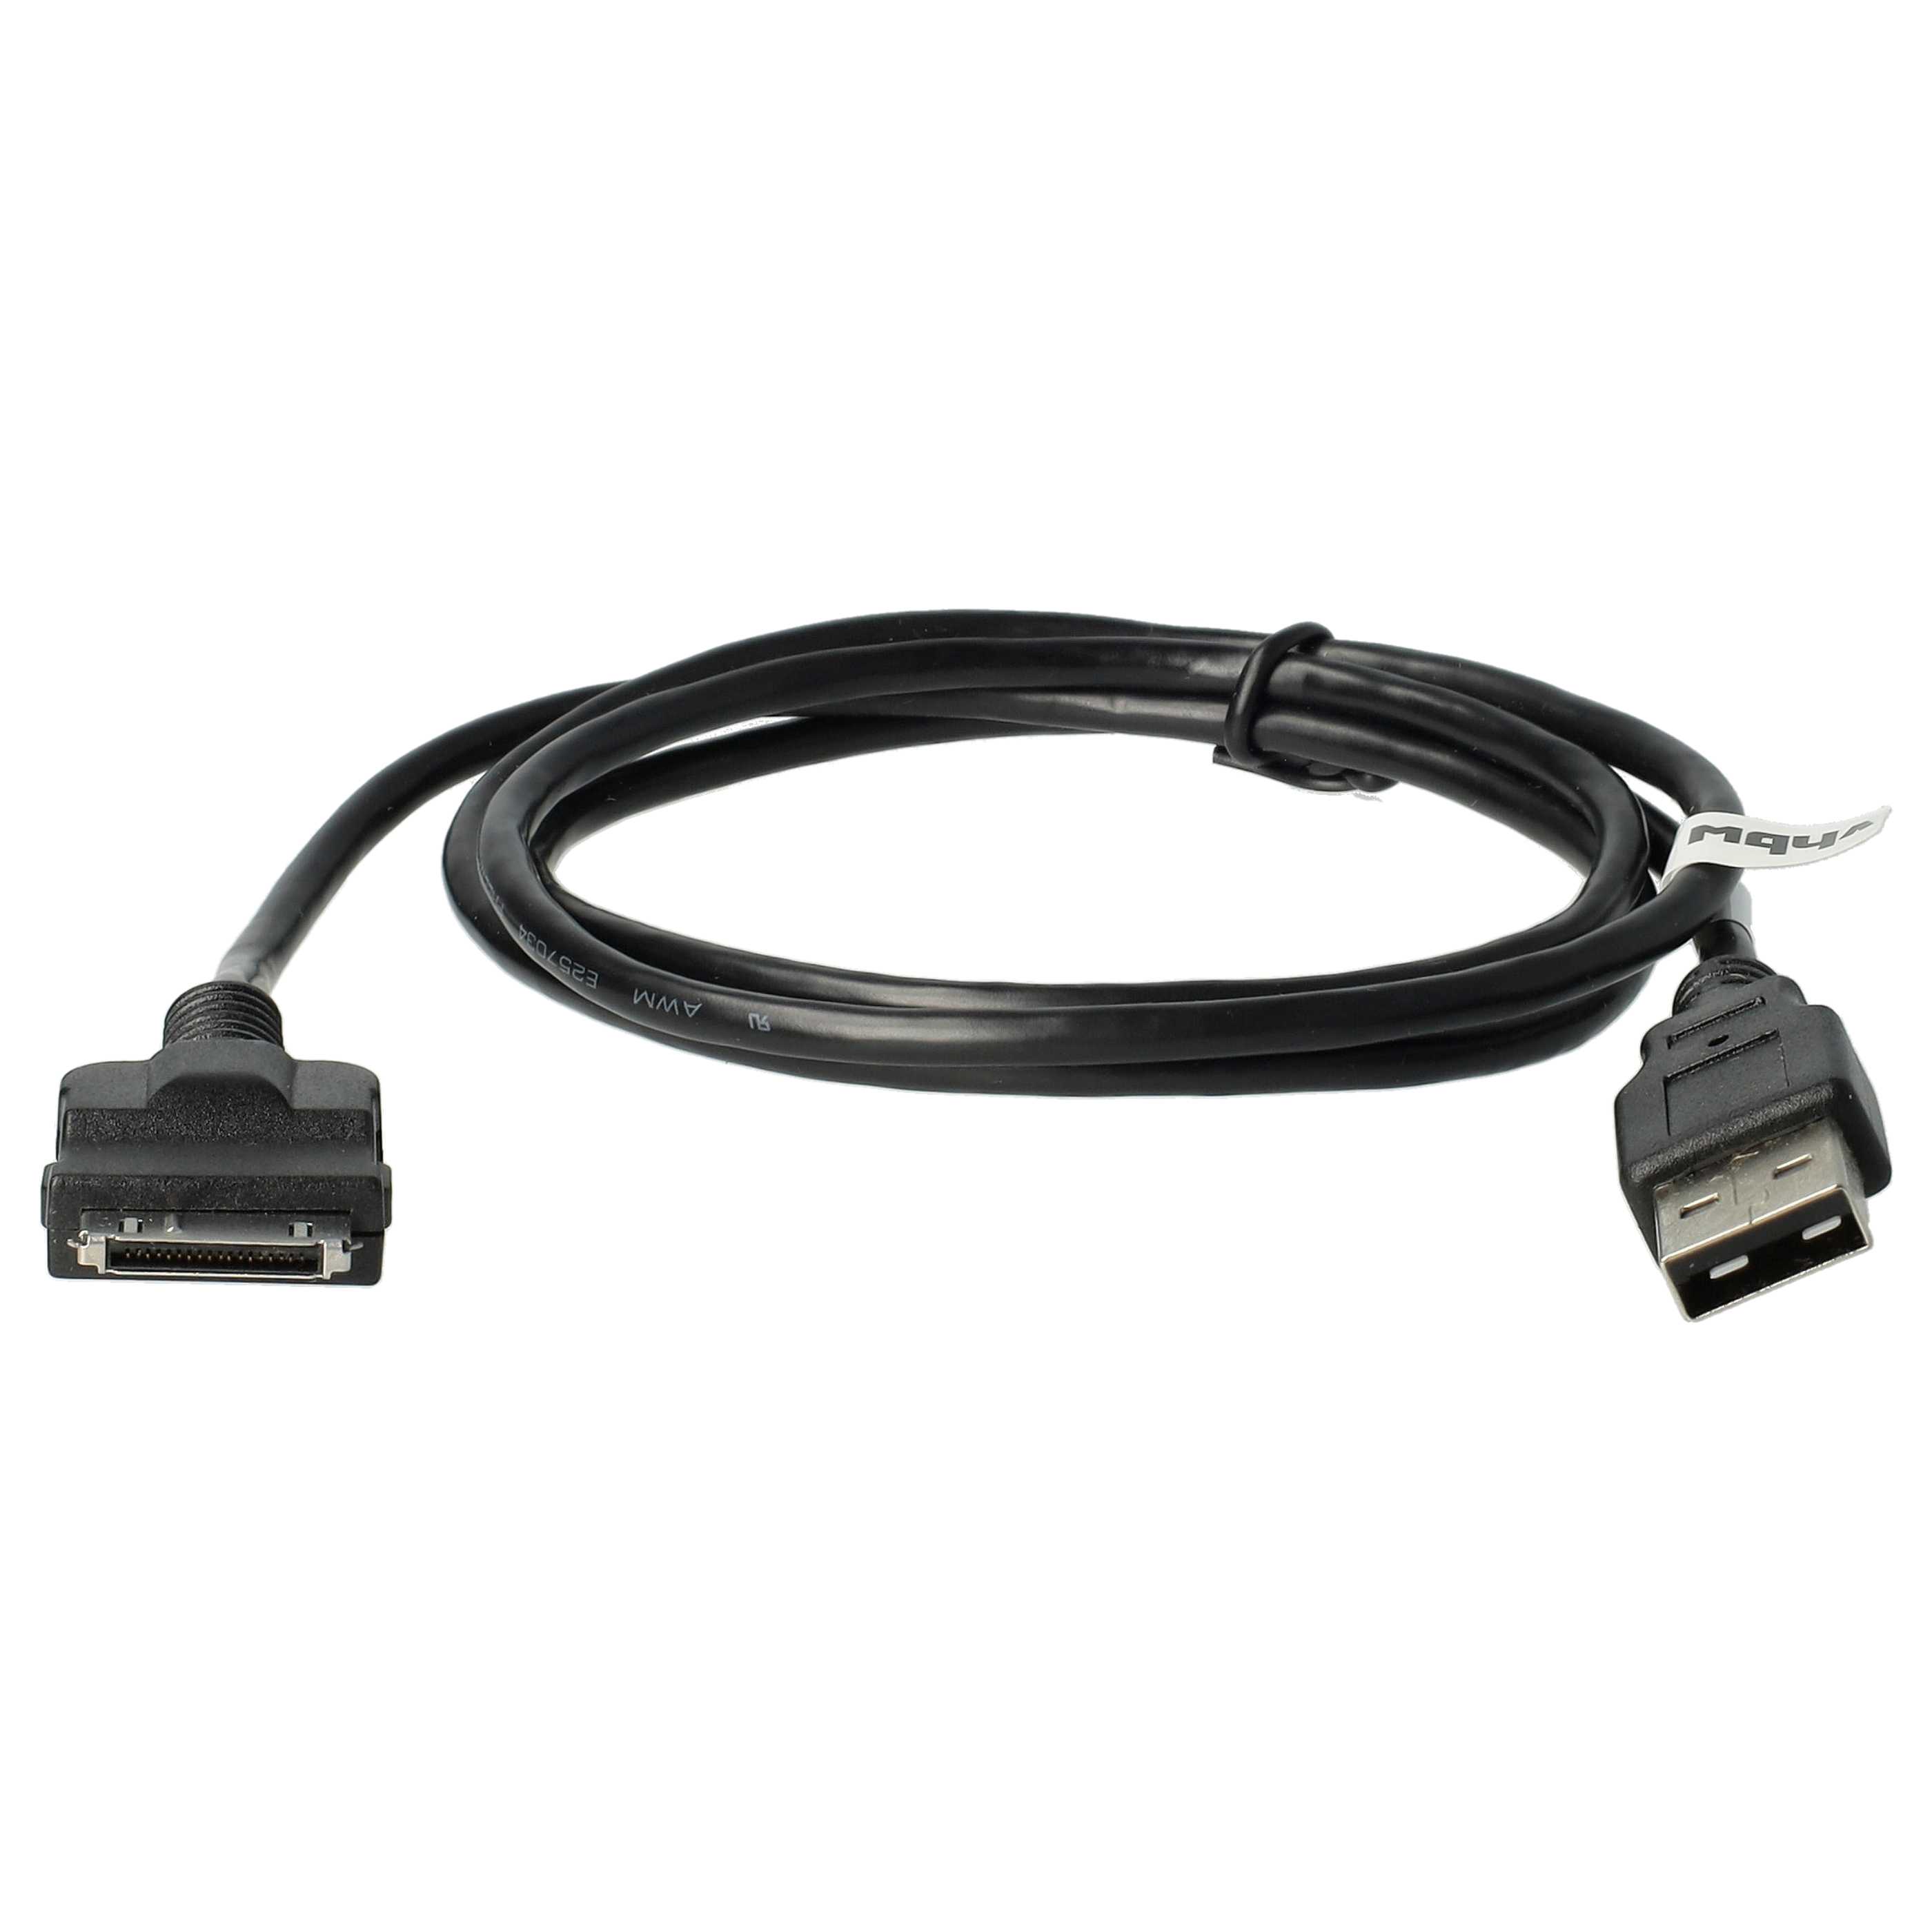 USB Data Cable suitable for Iriver H10 1GB etc., 100 cm